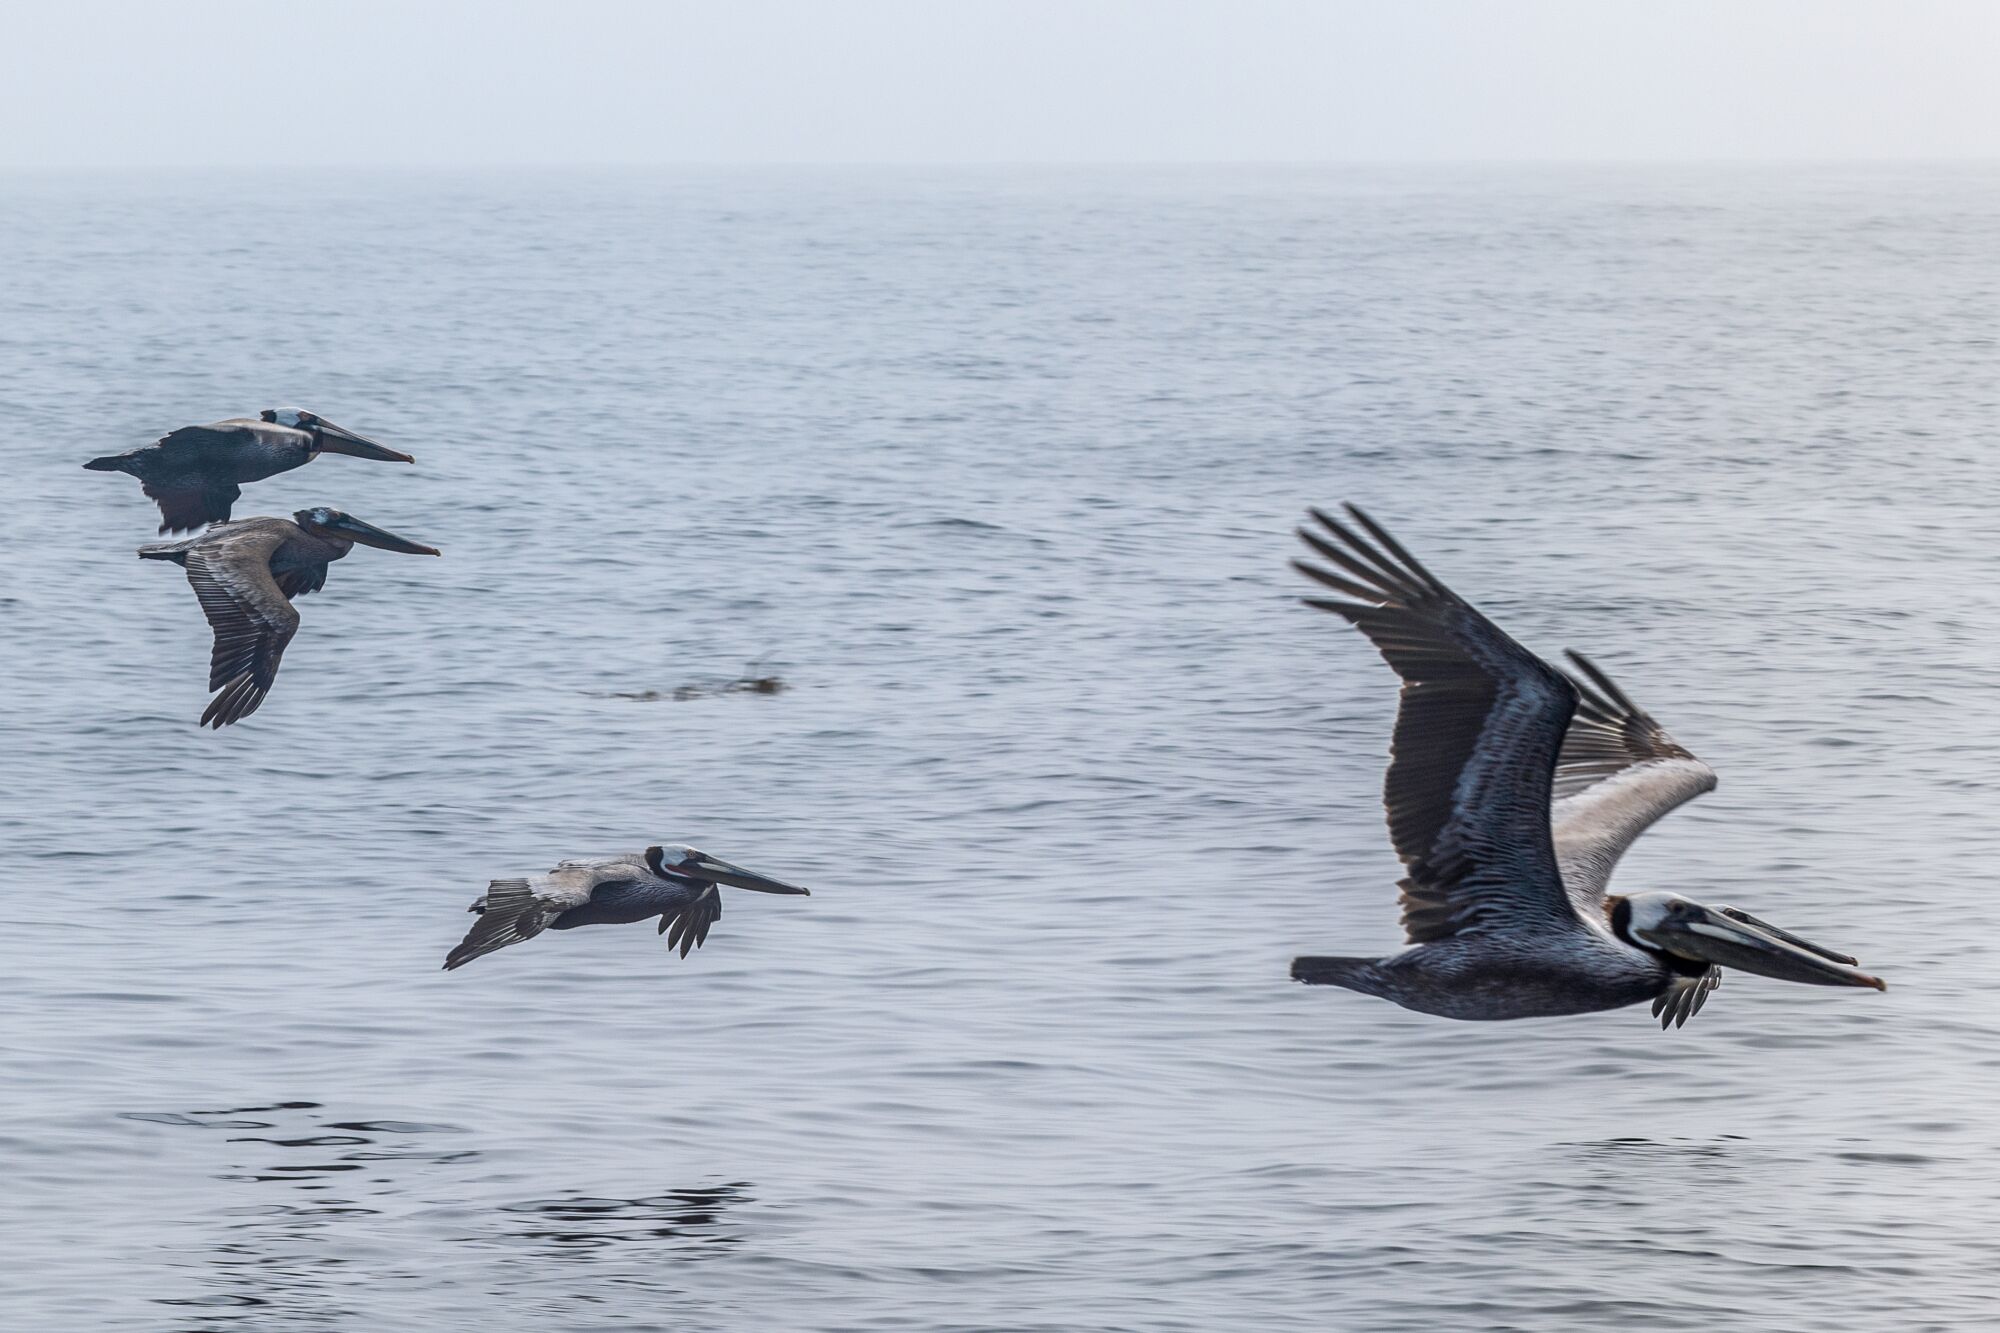 Brown pelicans fly alongside our boat for a moment, coming out of the fog and disappearing back into it in silence.